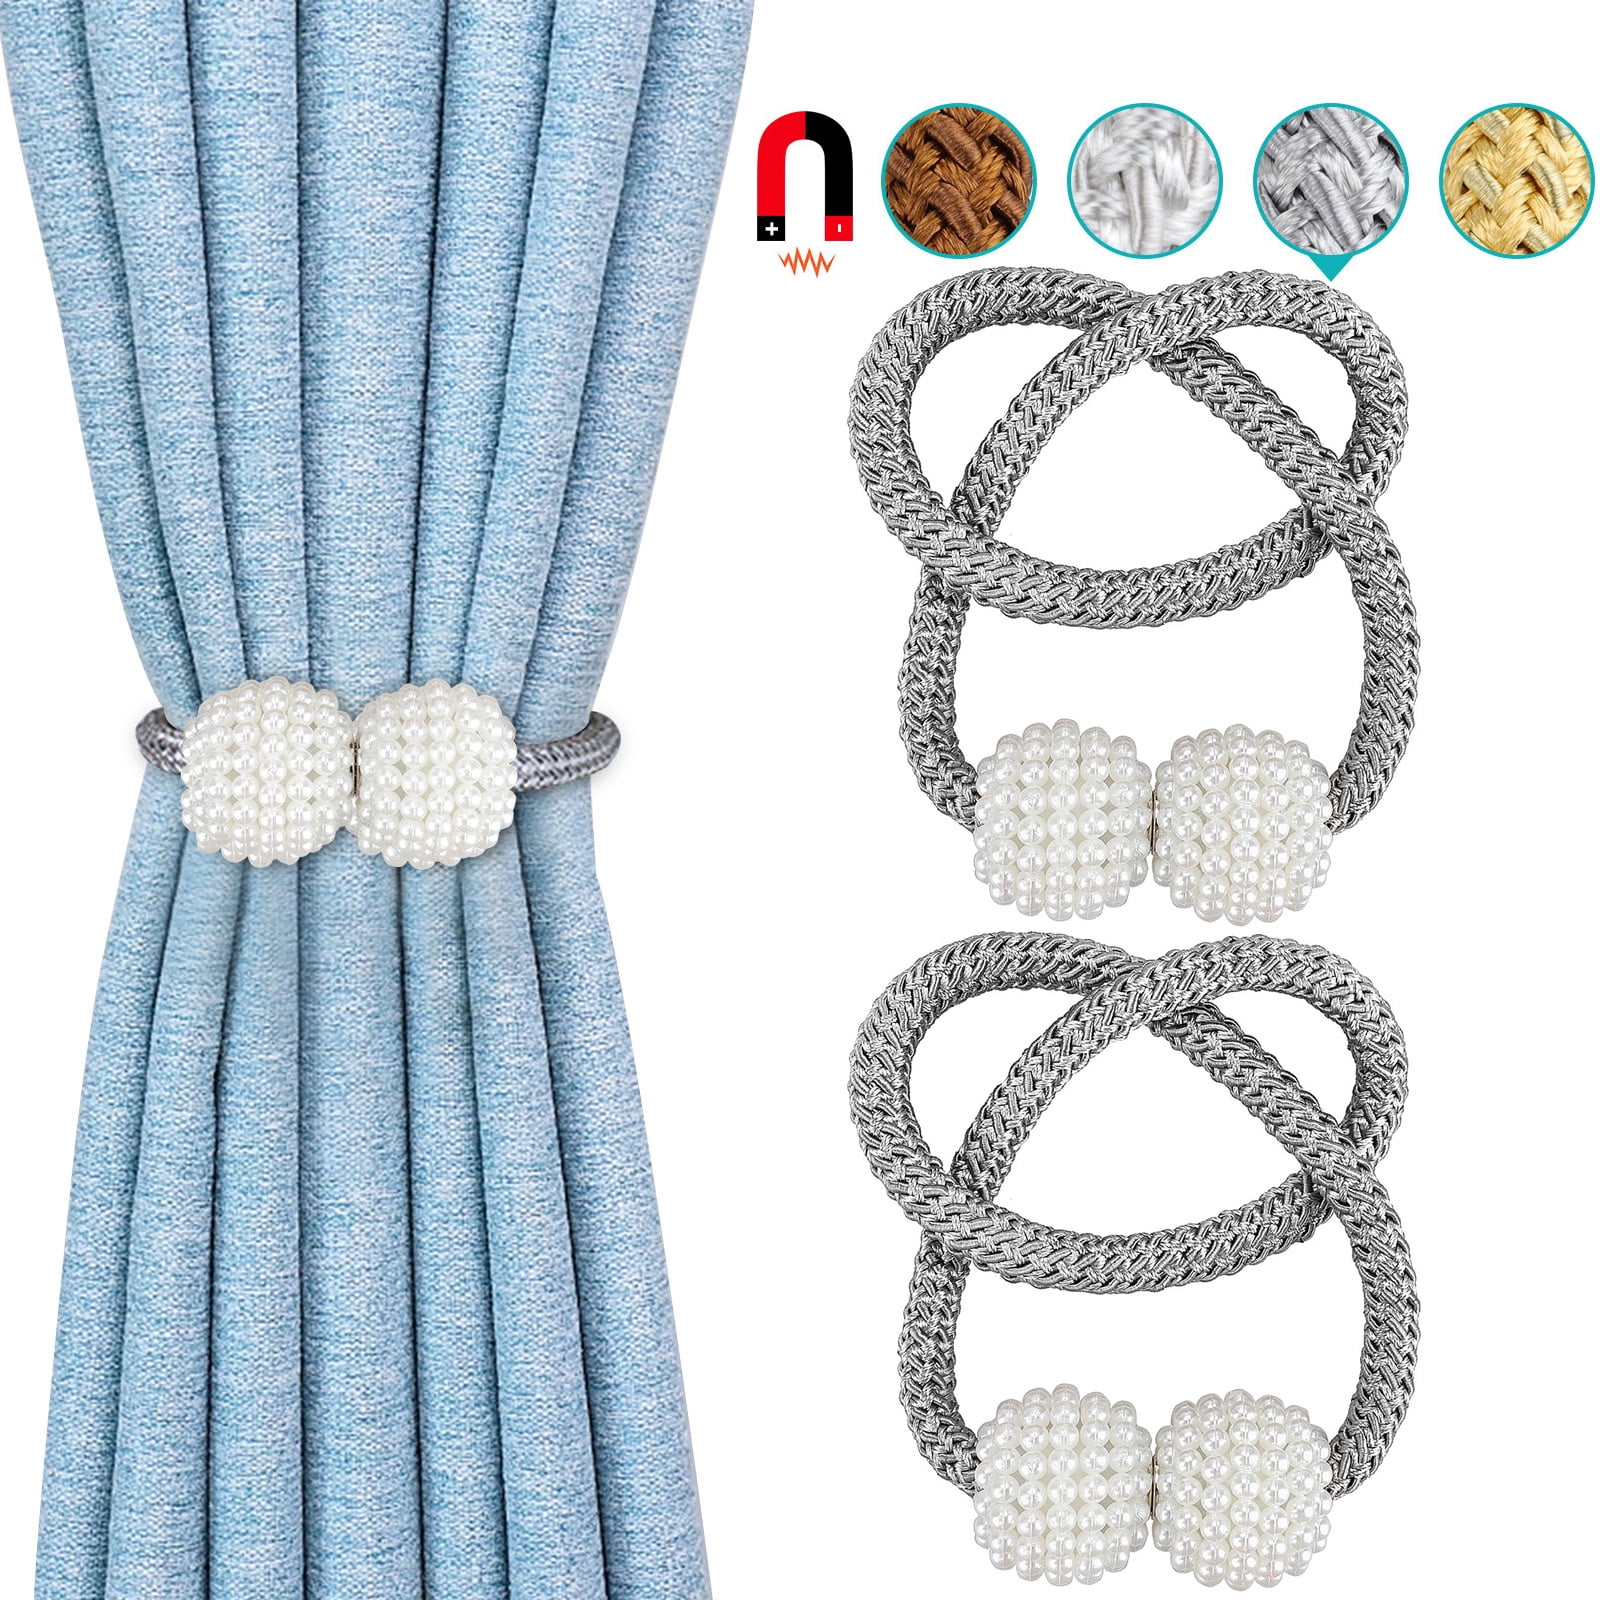 Multifaceted Ball Magnetic Curtain Tieback Curtain Buckle Tie Back Window Holder